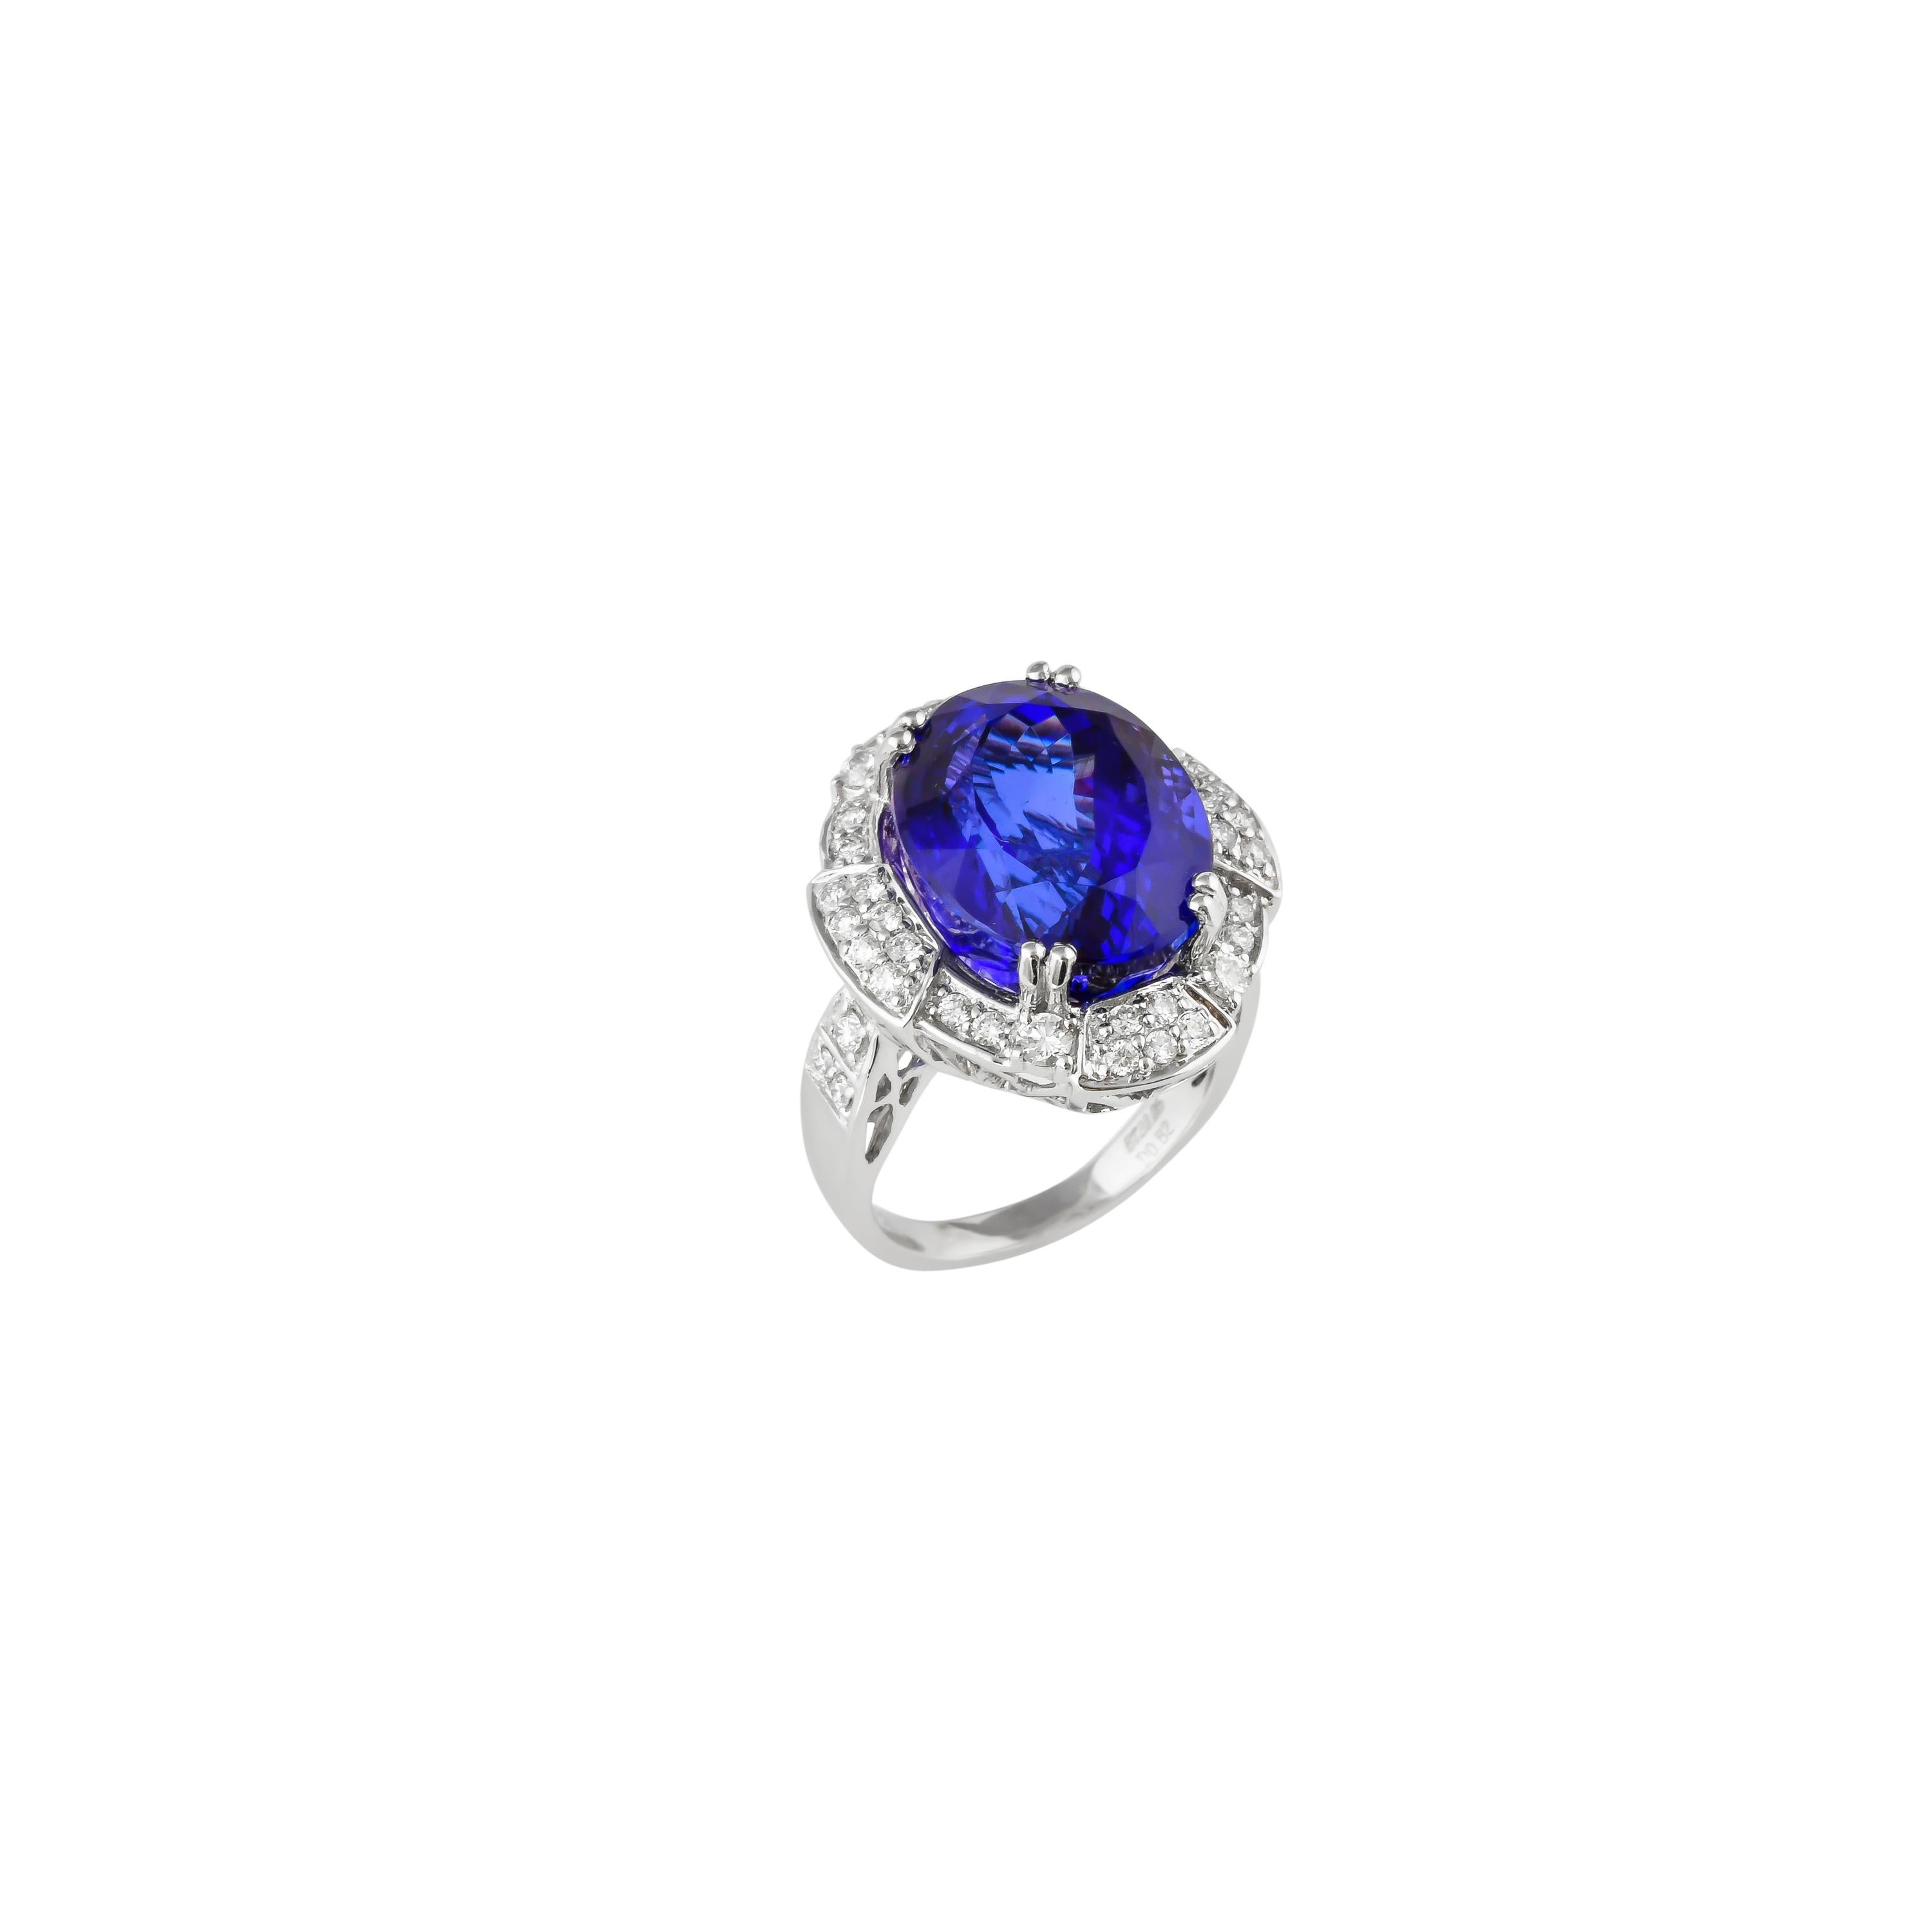 Oval Cut 20.0 Carat Tanzanite and White Diamond Ring in 18 Karat White Gold For Sale